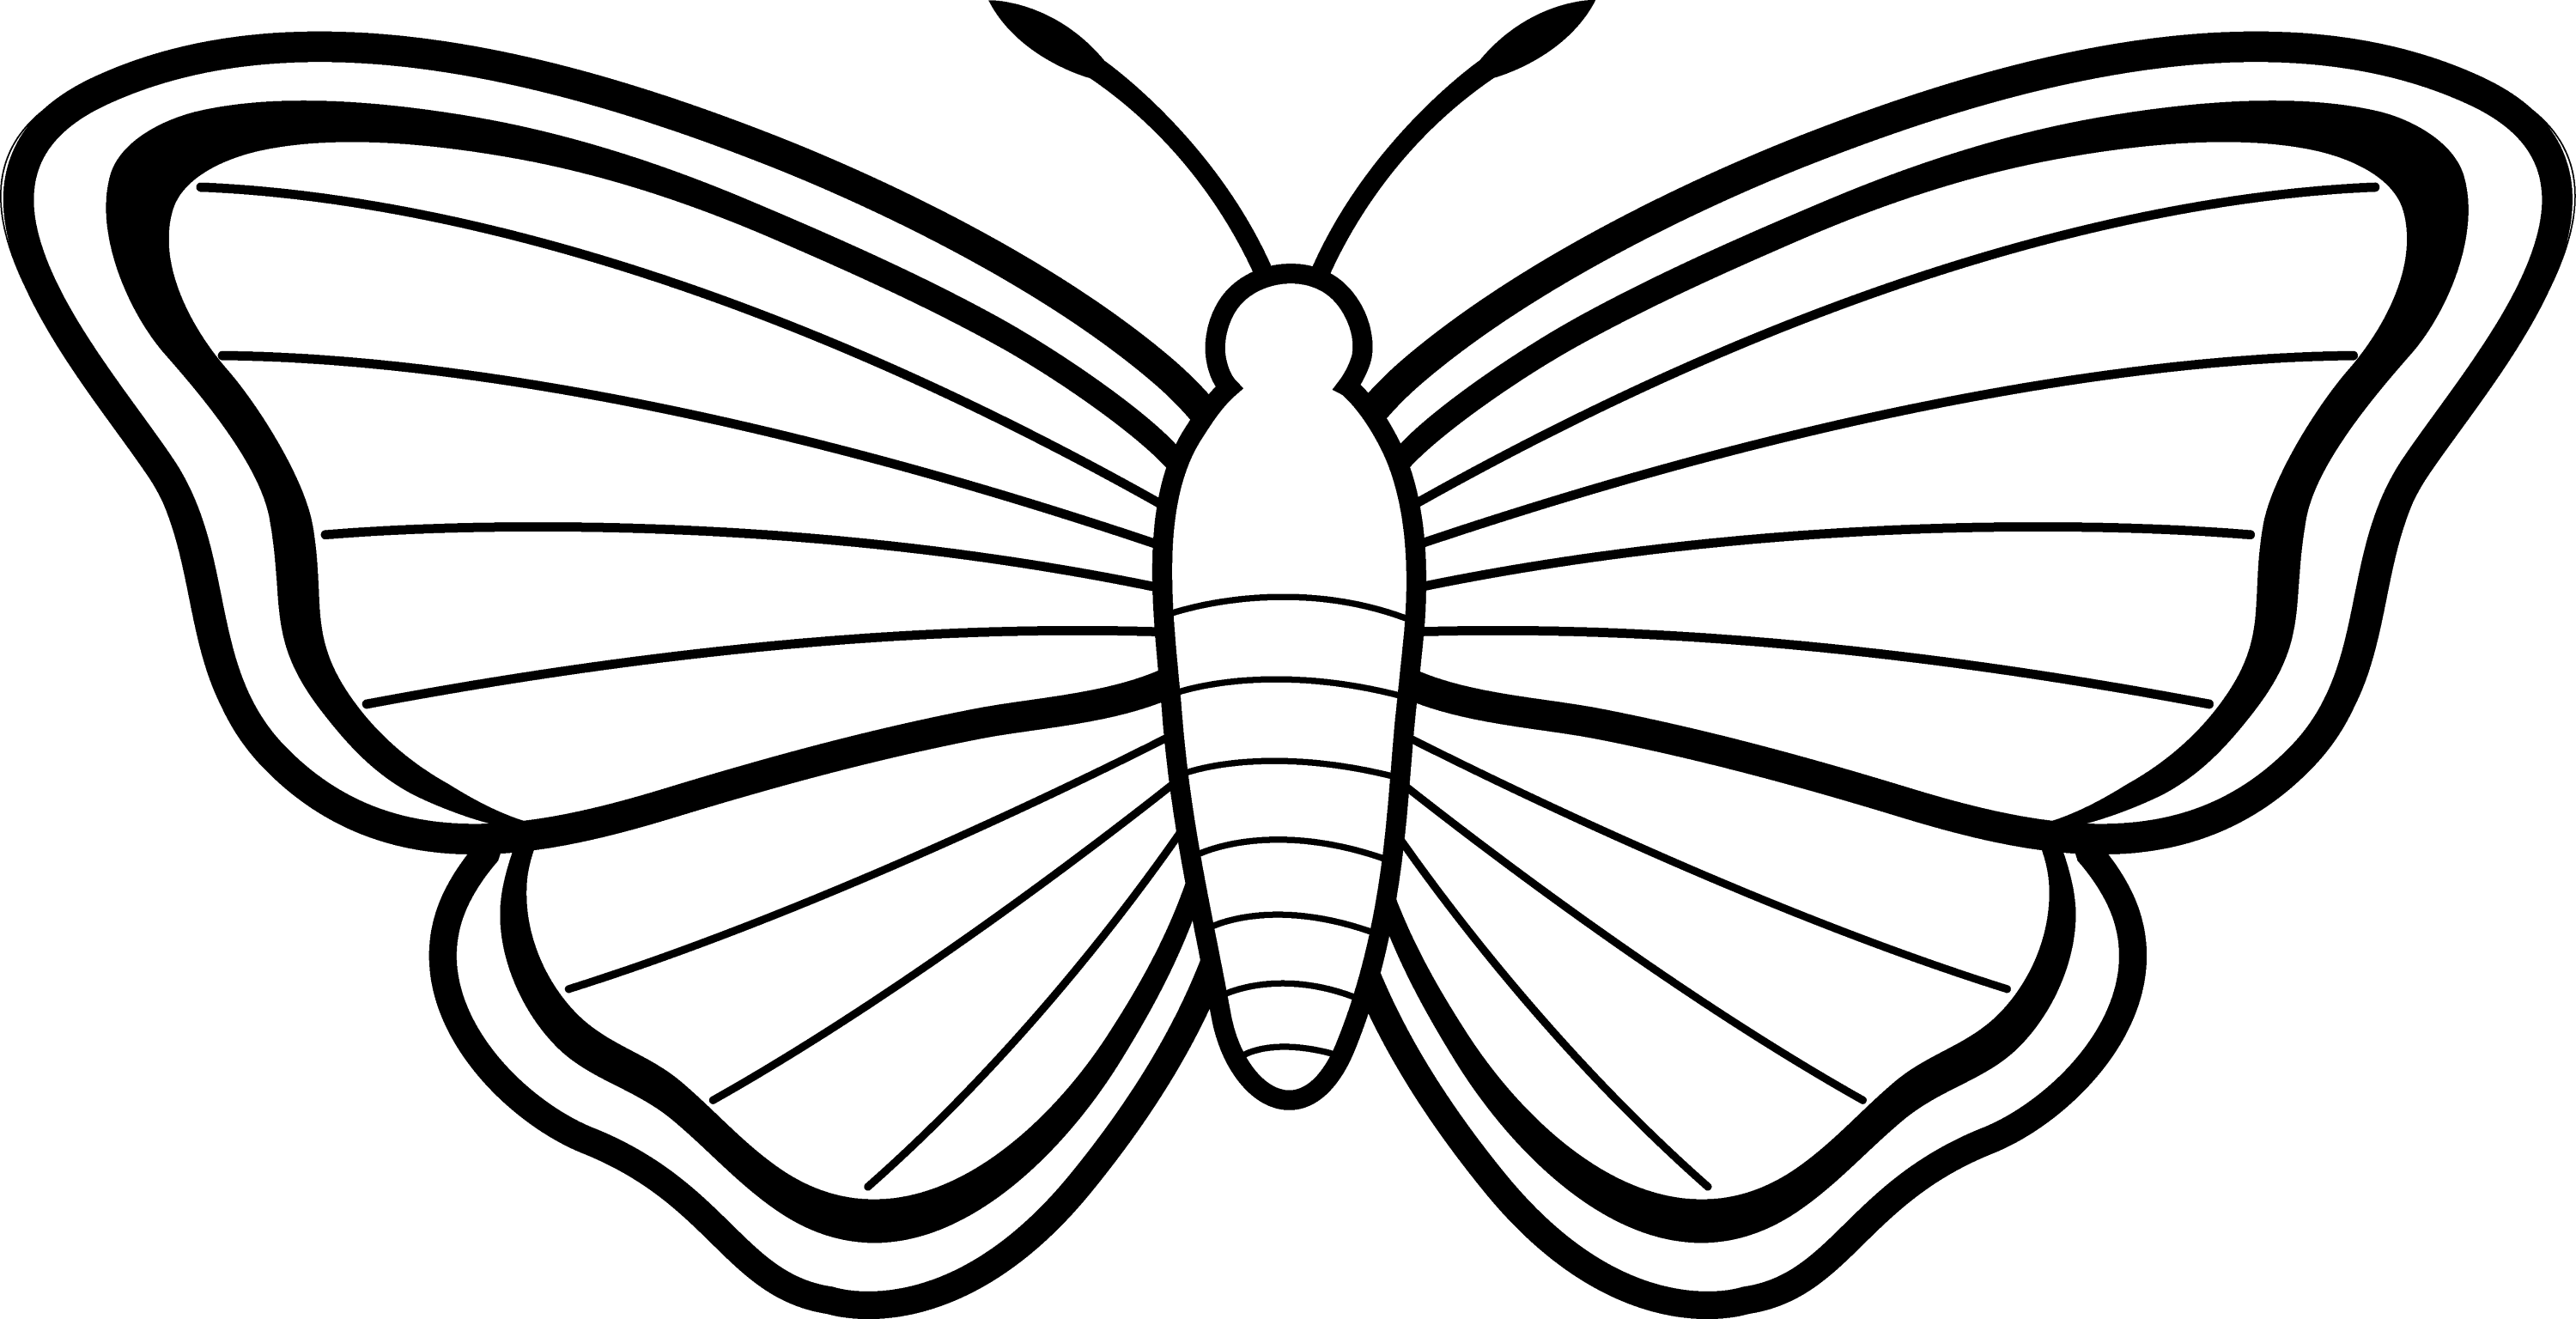 free black and white clipart of butterflies - photo #40